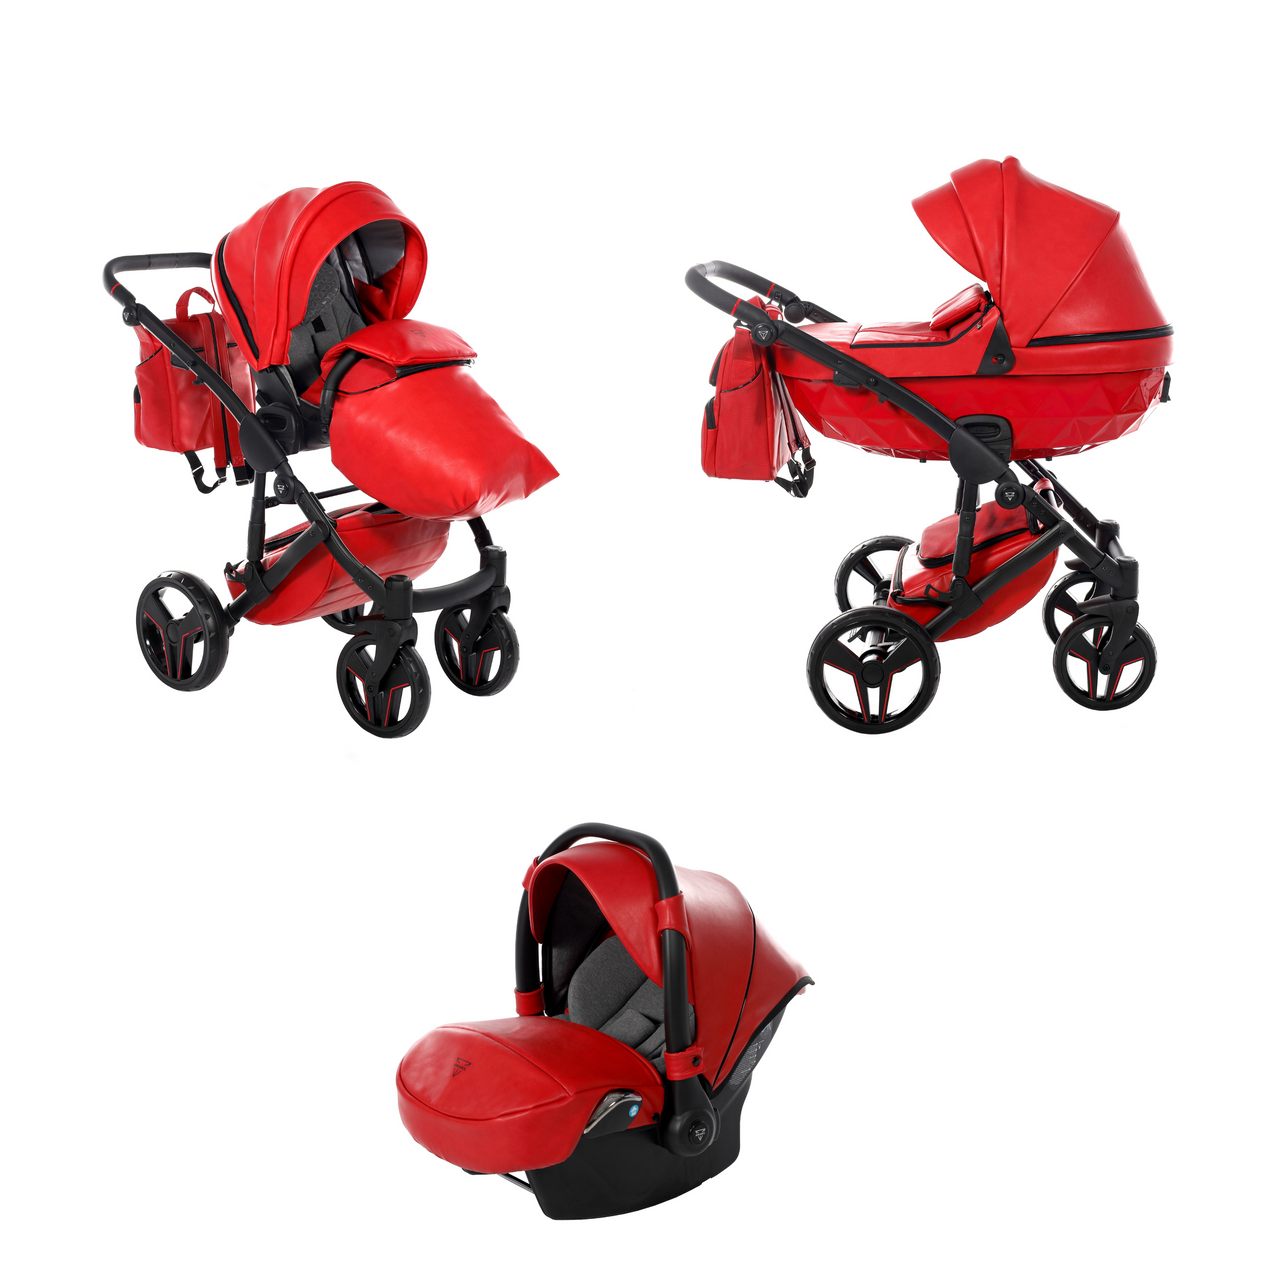 Junama S-Class 3 In 1 Travel System - Red - No | For Your Little One